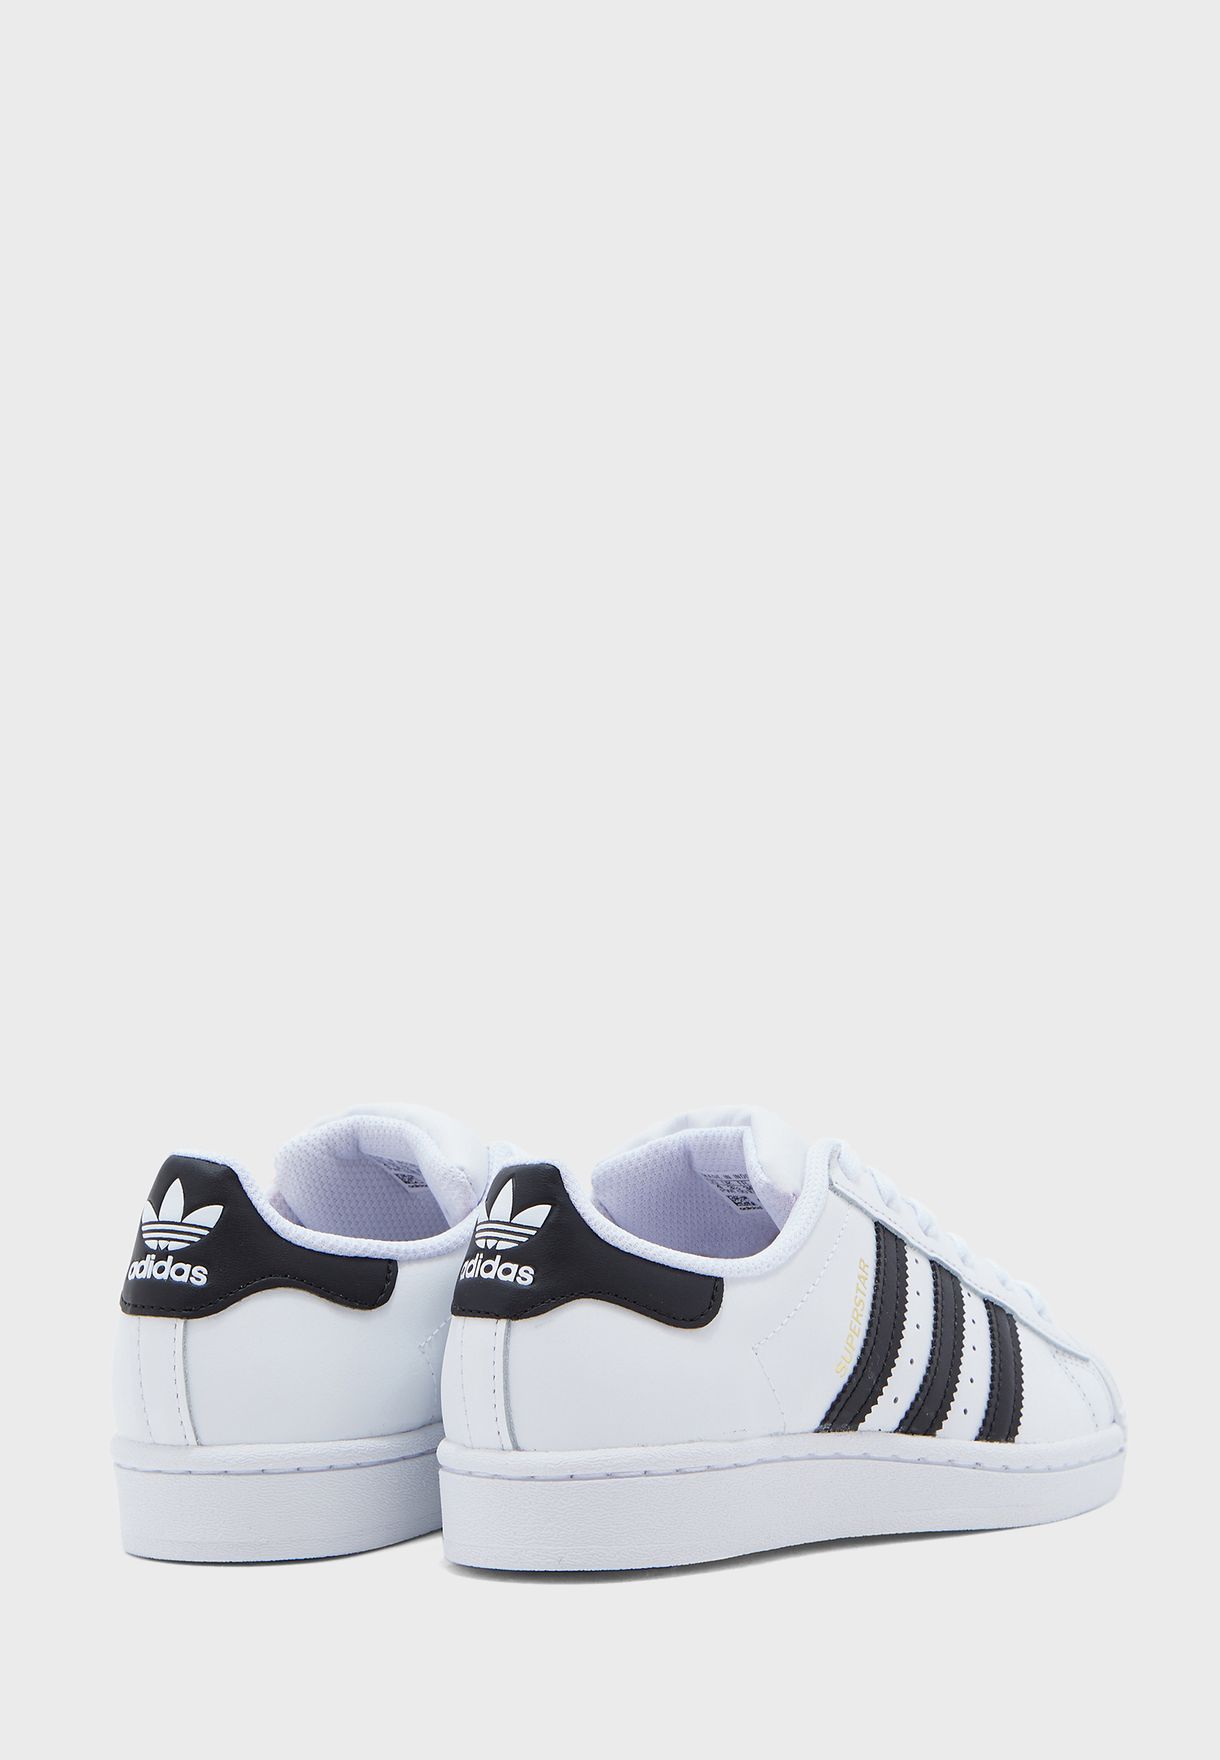 Superstar Casual Unisex Sneakers Shoes